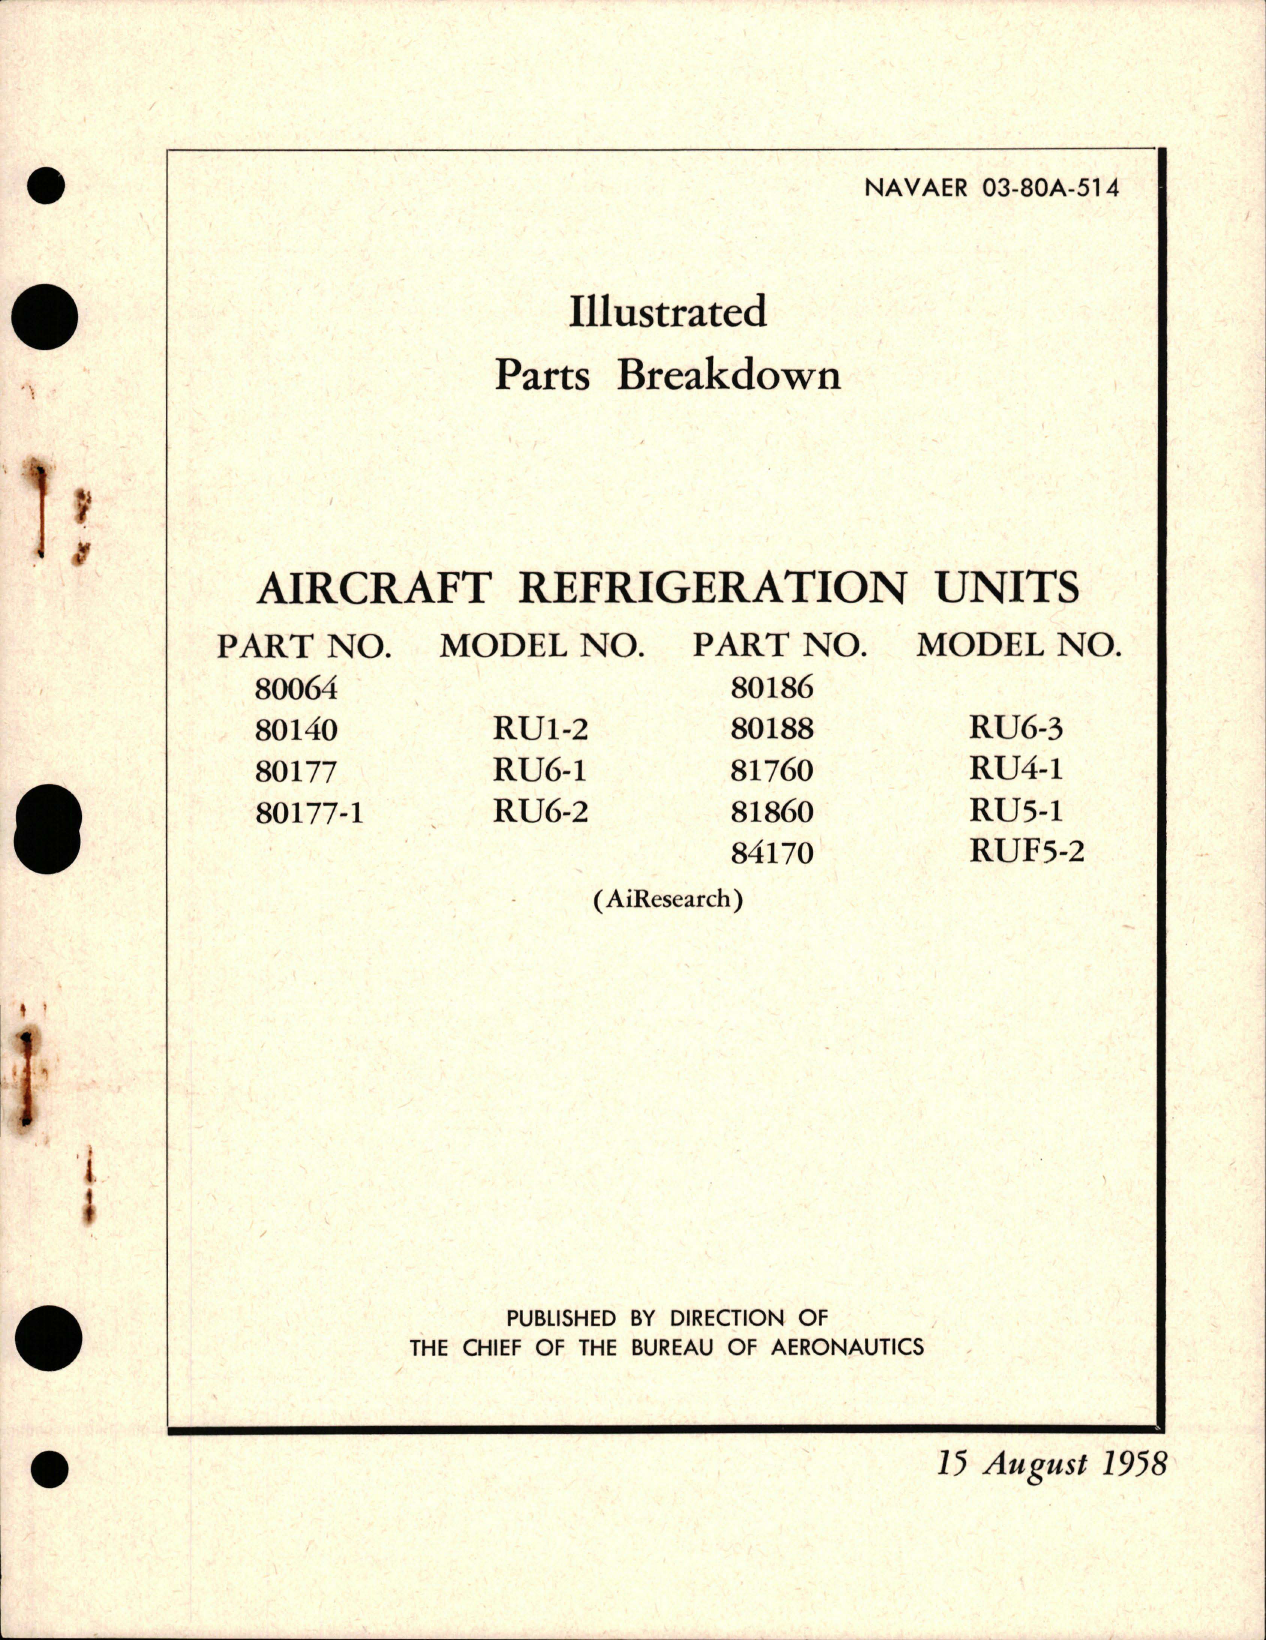 Sample page 1 from AirCorps Library document: Illustrated Parts Breakdown for Aircraft Refrigeration Units 